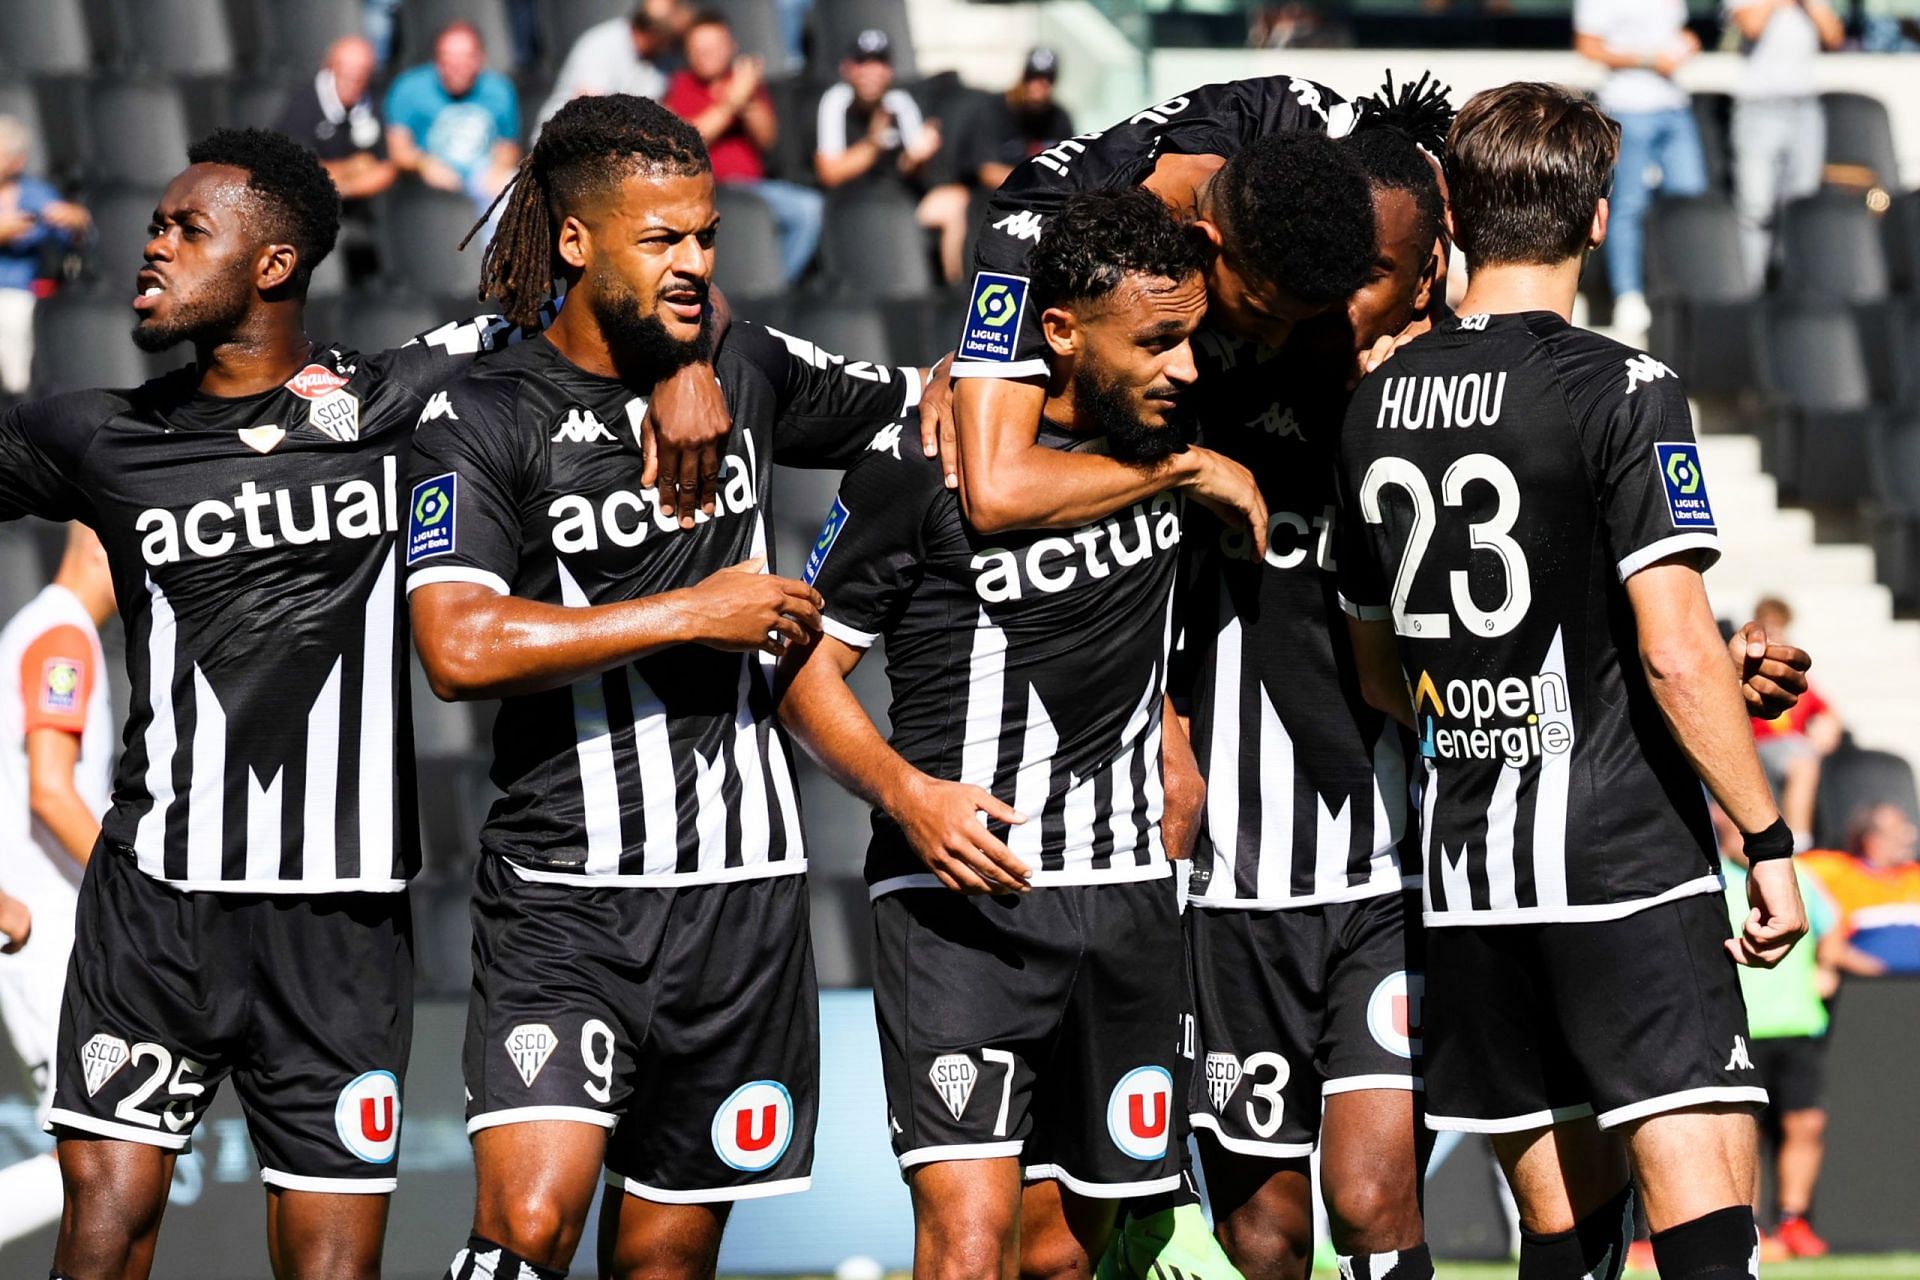 Can Angers pick up a rare win over Auxerre this weekend?